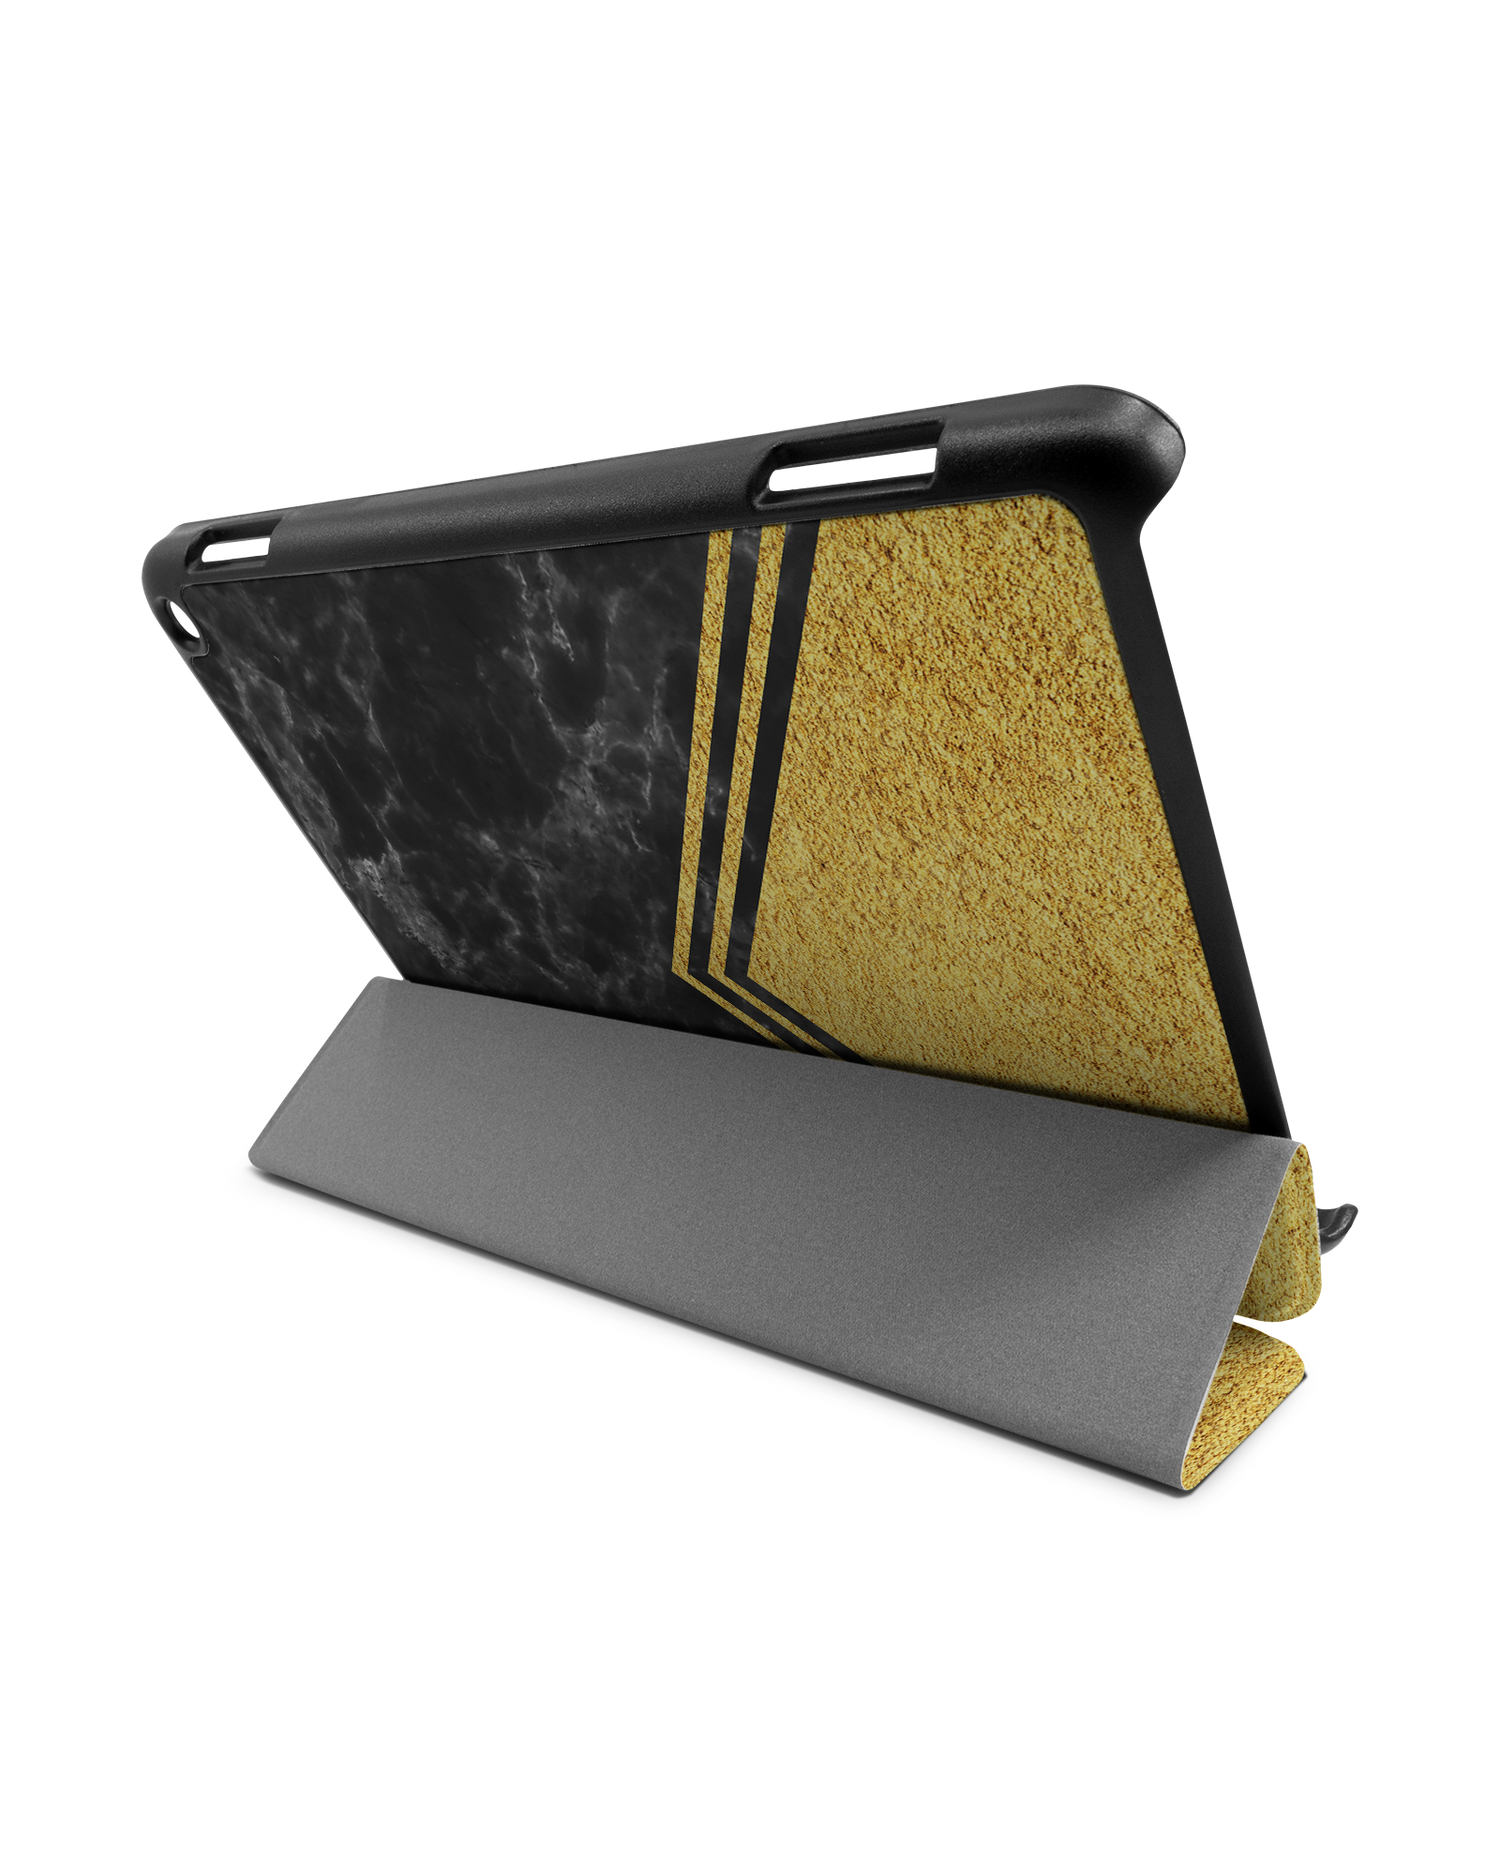 Gold Marble Tablet Smart Case for Amazon Fire HD 8 (2022), Amazon Fire HD 8 Plus (2022), Amazon Fire HD 8 (2020), Amazon Fire HD 8 Plus (2020): Used as Stand